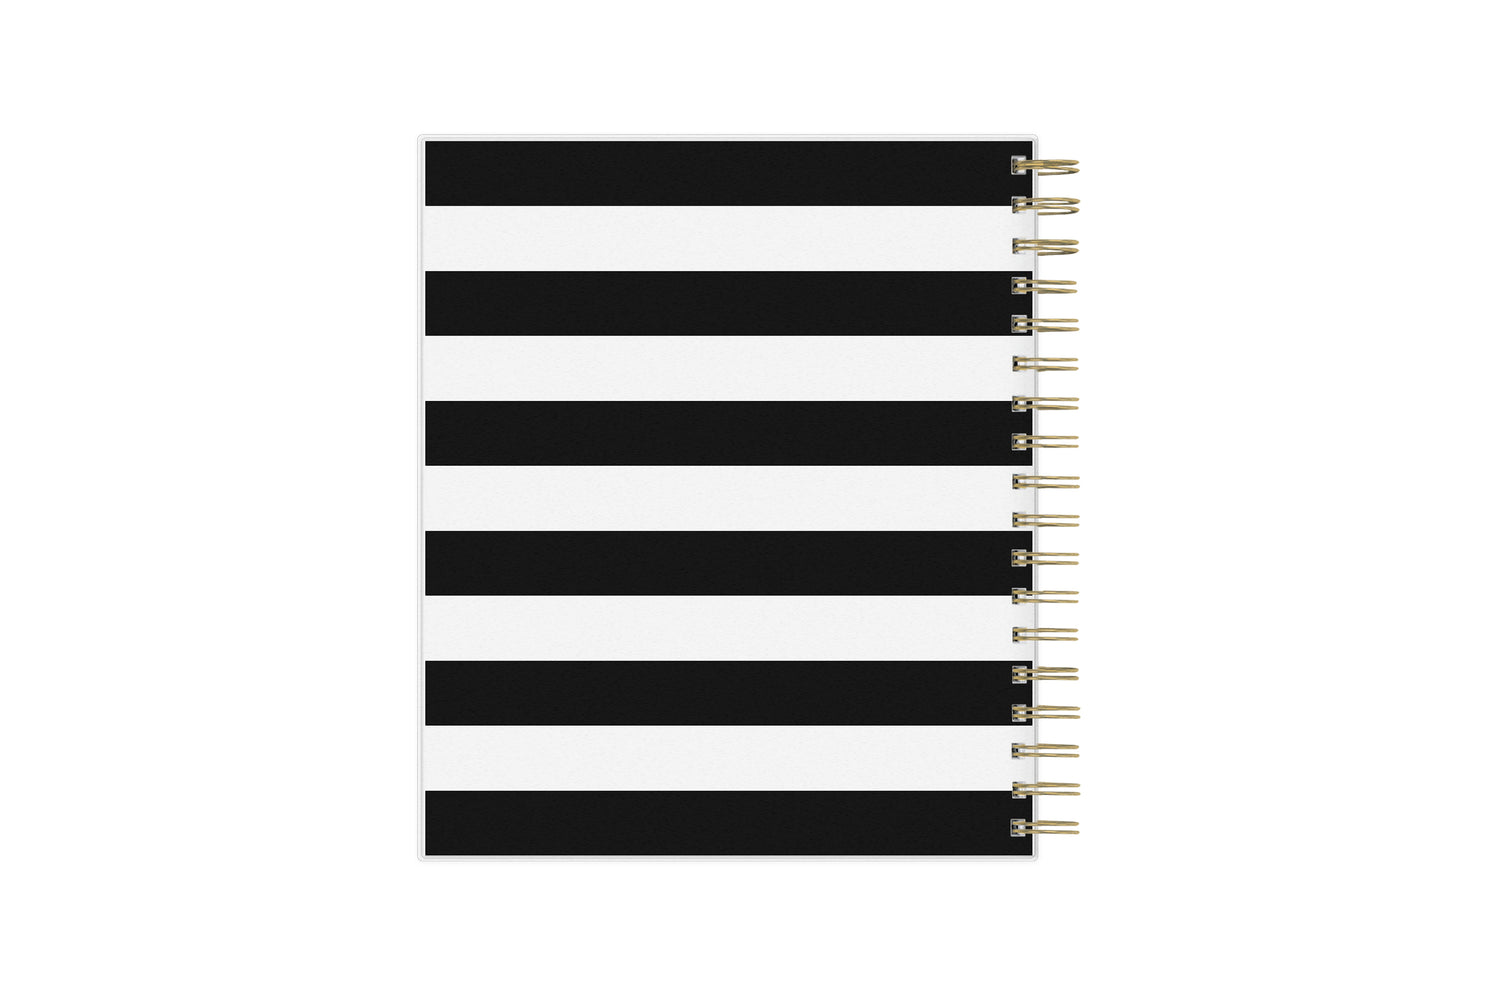  daily academic planner featuring black stripes back cover from Day designer for blue sky in a 8x10 planner size